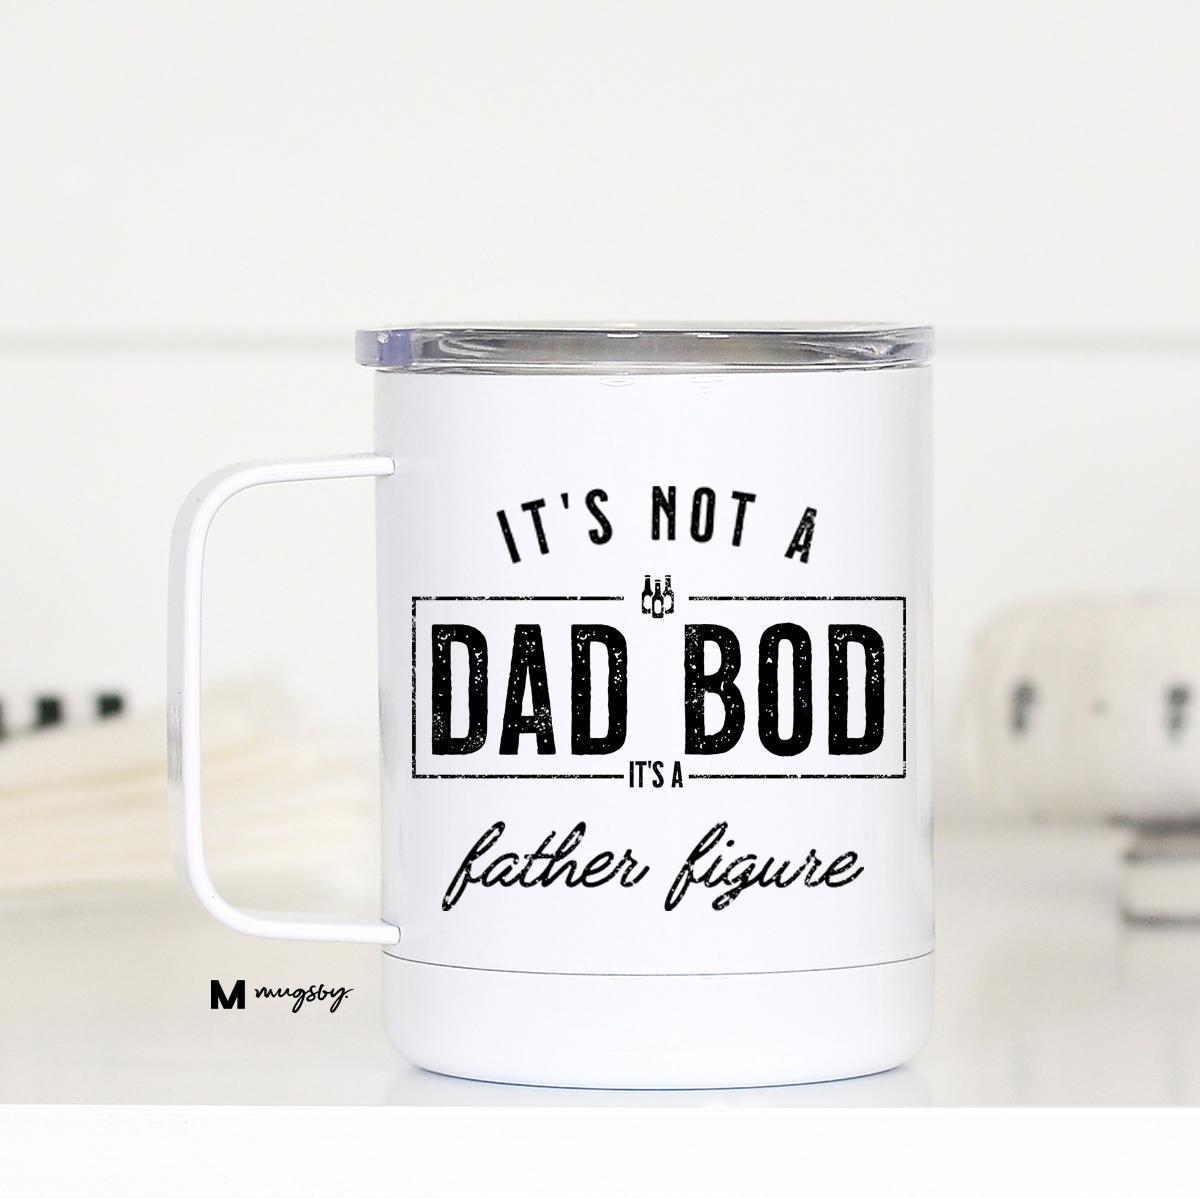 It’s Not A Dad Bod, It’s A Father Figure Insulated Mug